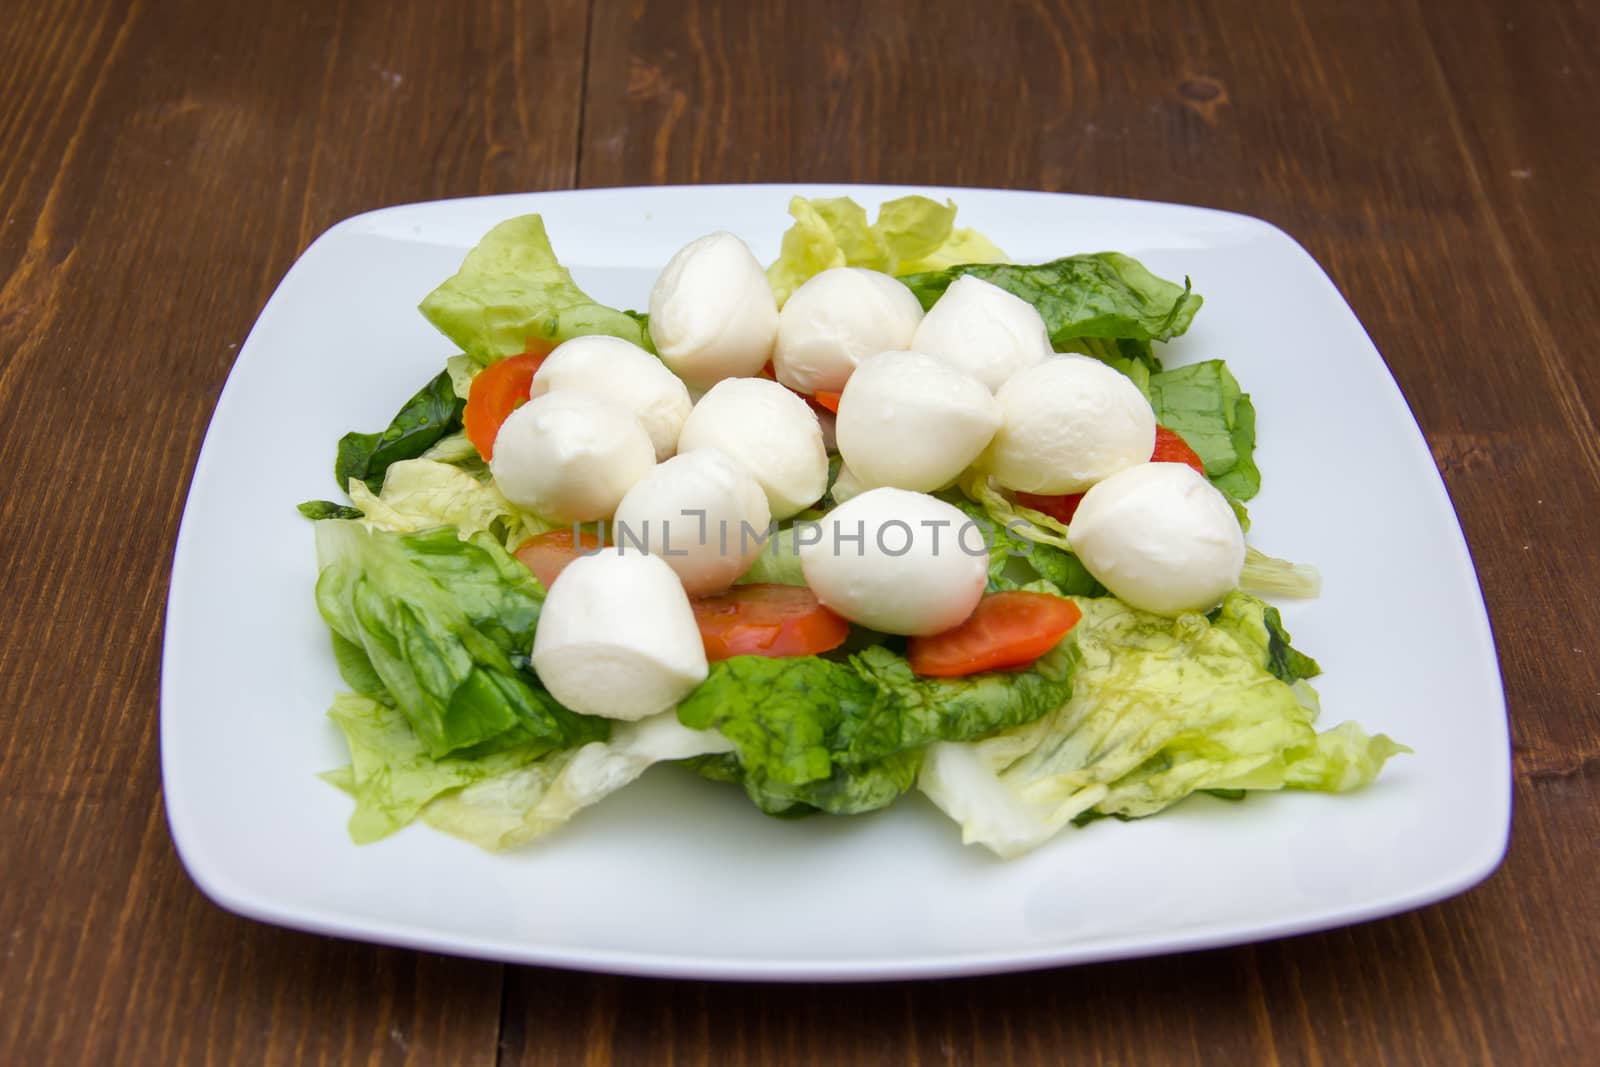 Salad with tomatoes and mozzarella on wood by spafra